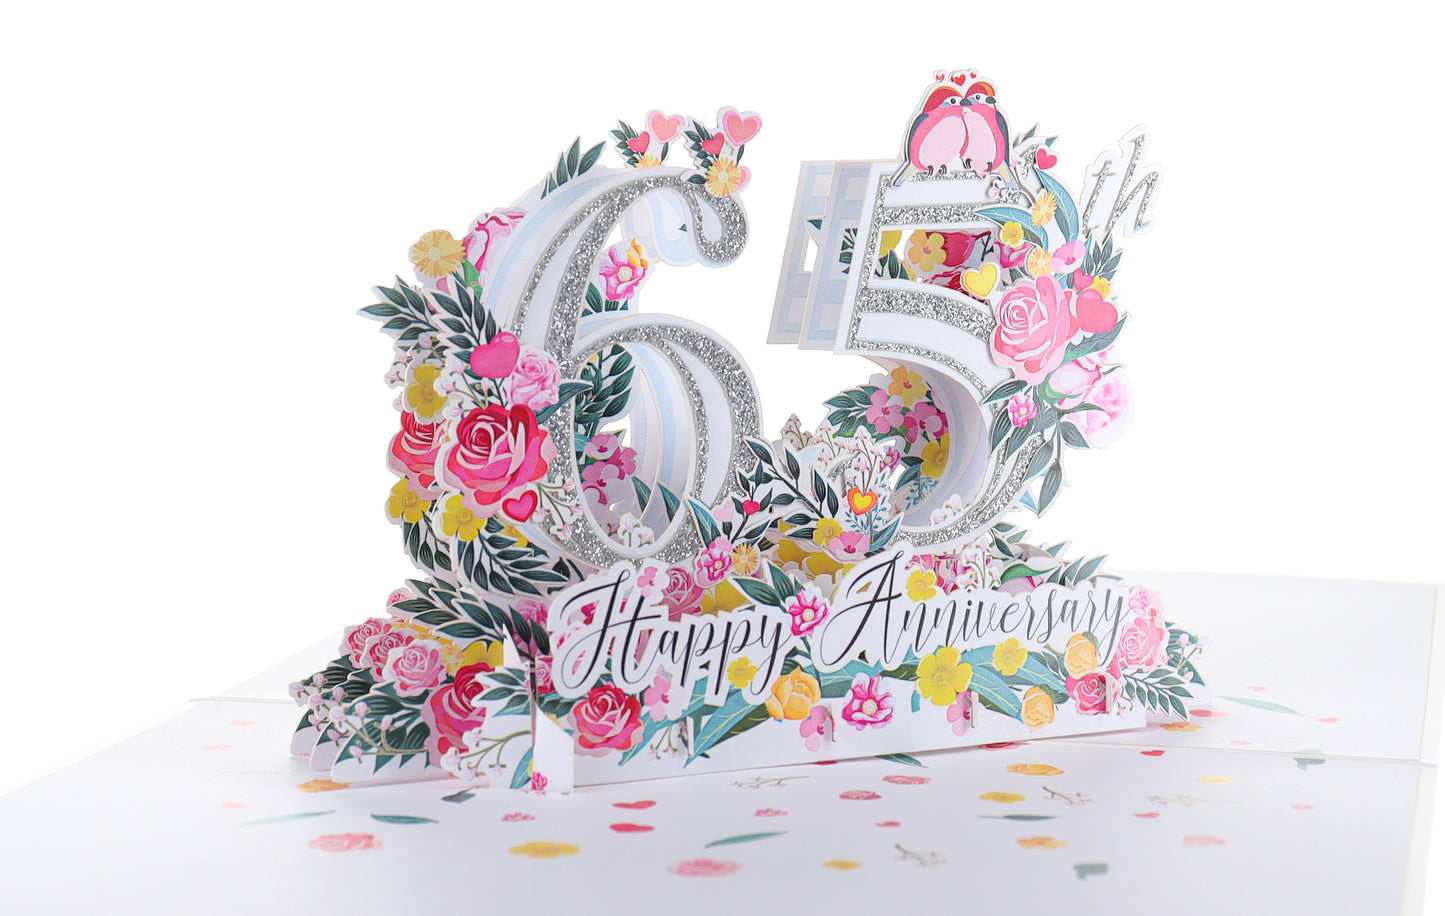 Happy 65th Milestone Anniversary 3D Pop Up Greeting Card - Anniversary - Wedding - Wedding Anniversa - iGifts And Cards